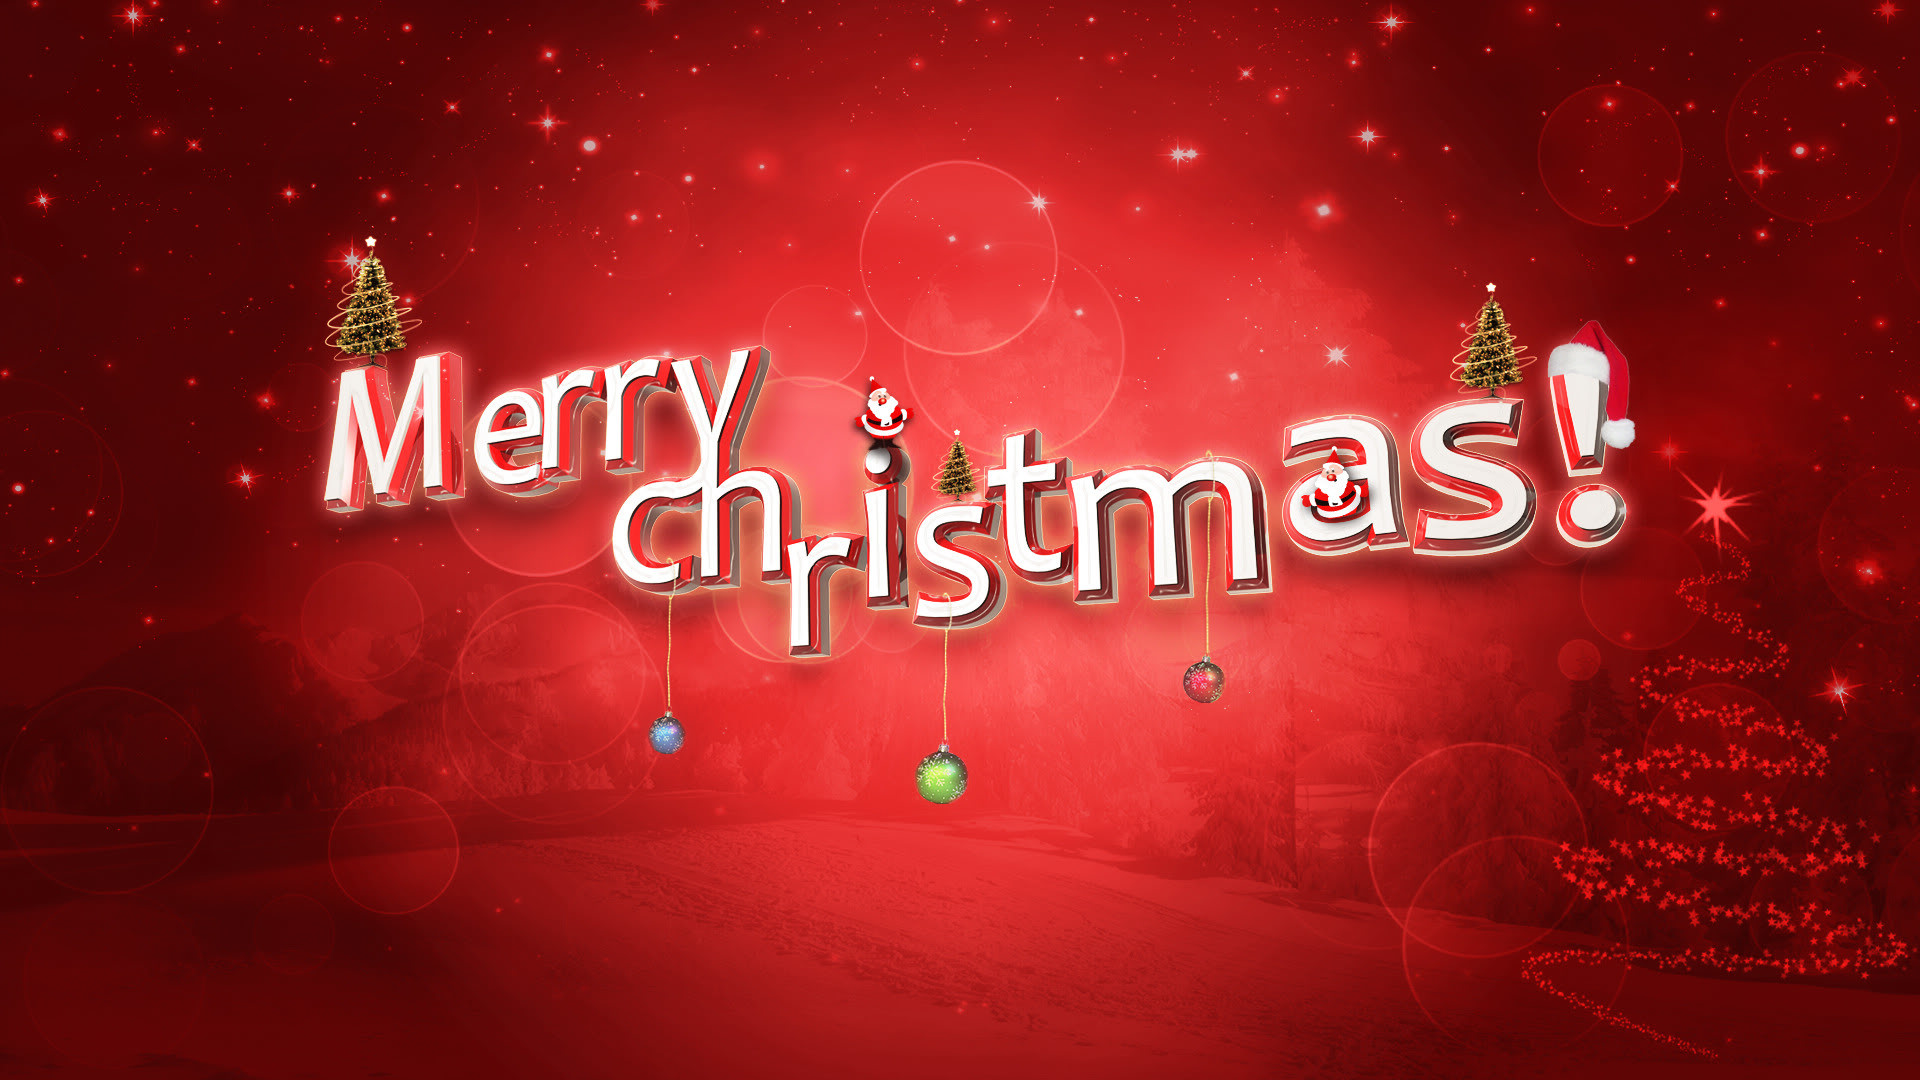 1920x1080 Merry Christmas HD Wallpapers: Find best latest Merry Christmas HD Wallpapers  for your PC desktop background & mobile phones.